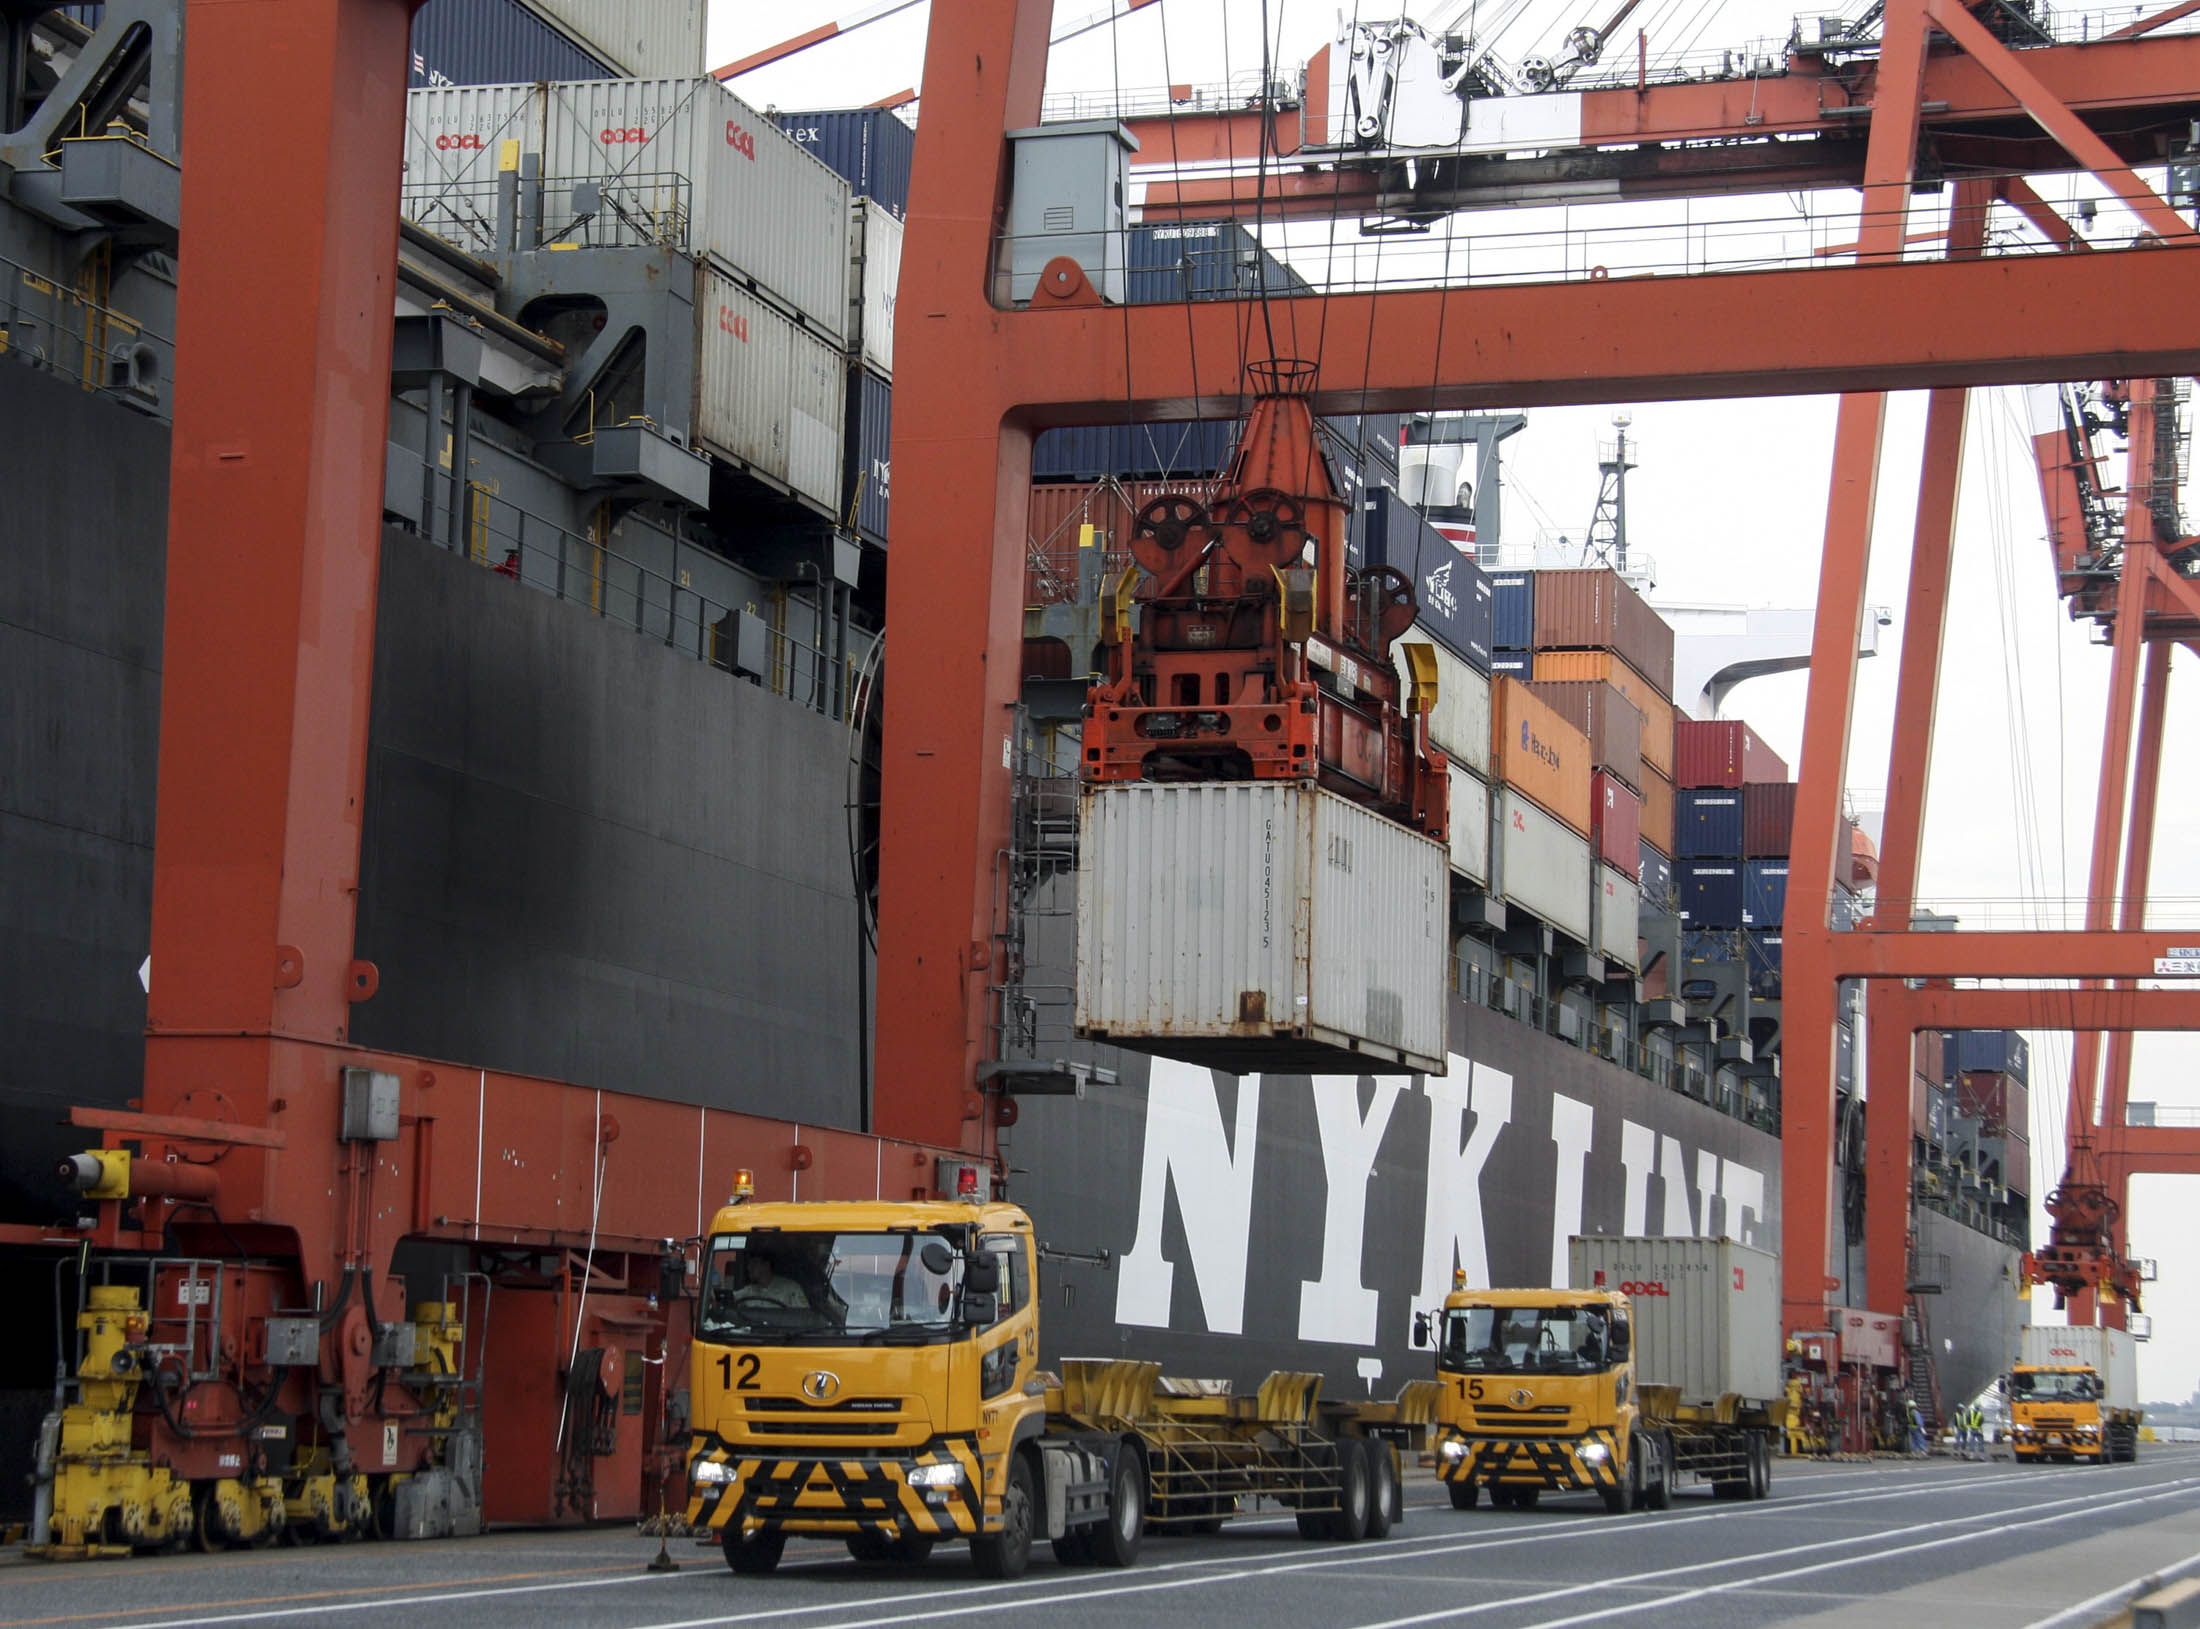 A container is unloaded from a truck onto a ship at a container terminal in Tokyo, Japan, on Friday, Sep 26, 2008. Photographer: Haruyoshi Yamaguchi/Bloomberg News